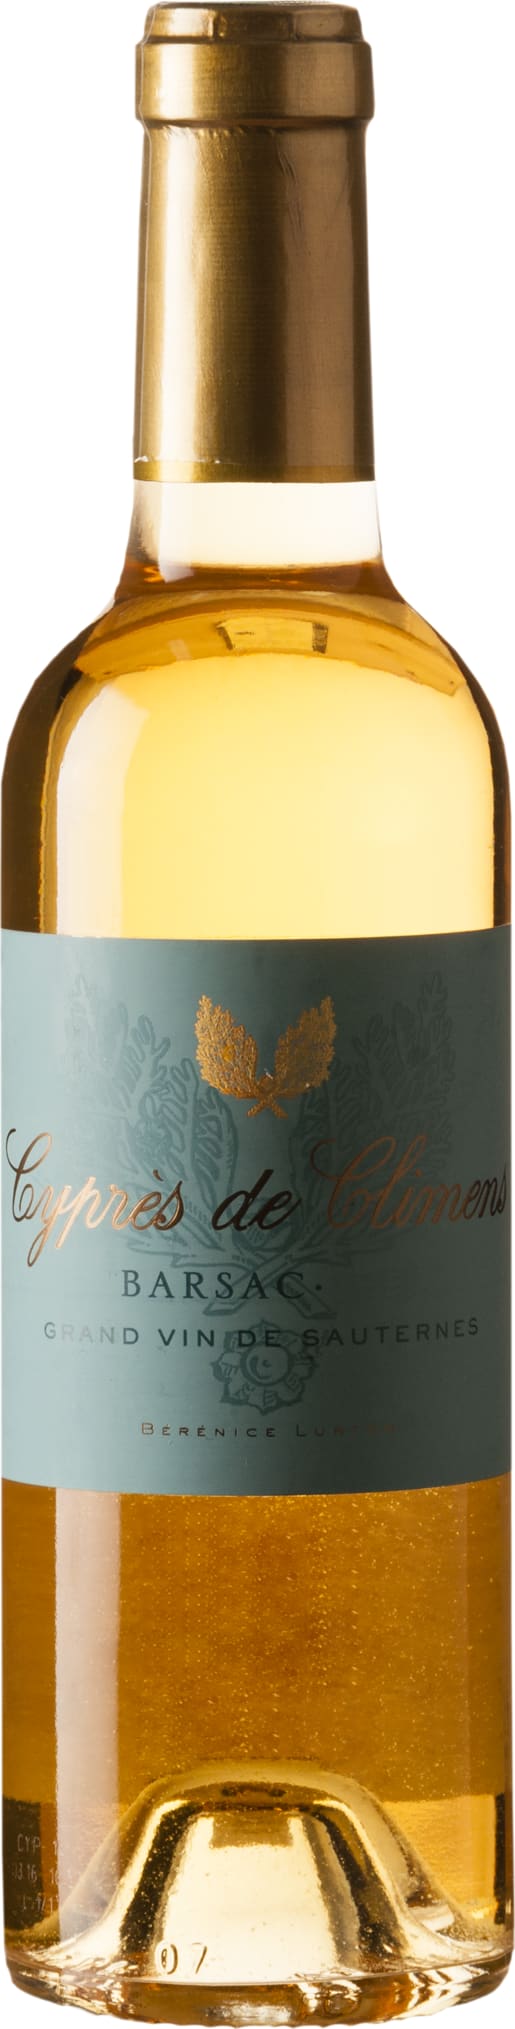 Chateau Climens Cypres de Climens Sautenes-Barsac 375cl 2013 37.5cl - Buy Chateau Climens Wines from GREAT WINES DIRECT wine shop